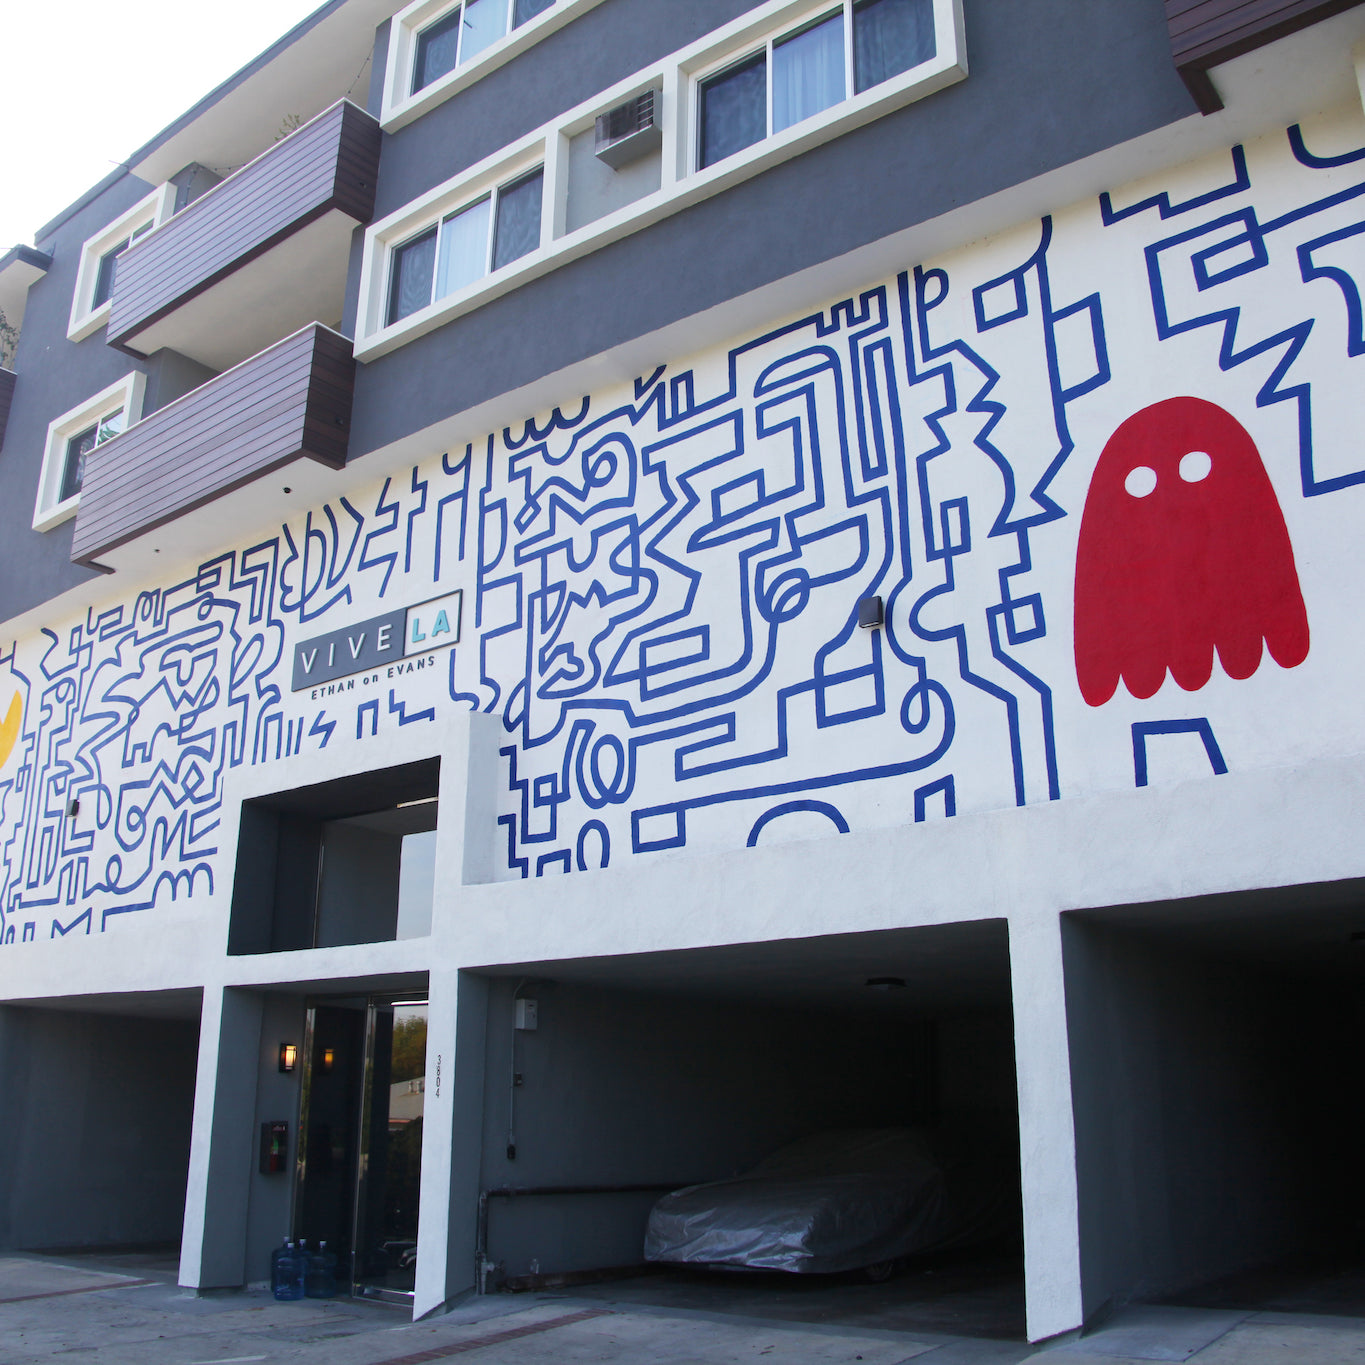 Close-up view of hand-painted mural by WRAPPED Studio at Ethan on Evans, with red PacMan above the entrance, integrating classic video game nostalgia into urban living.